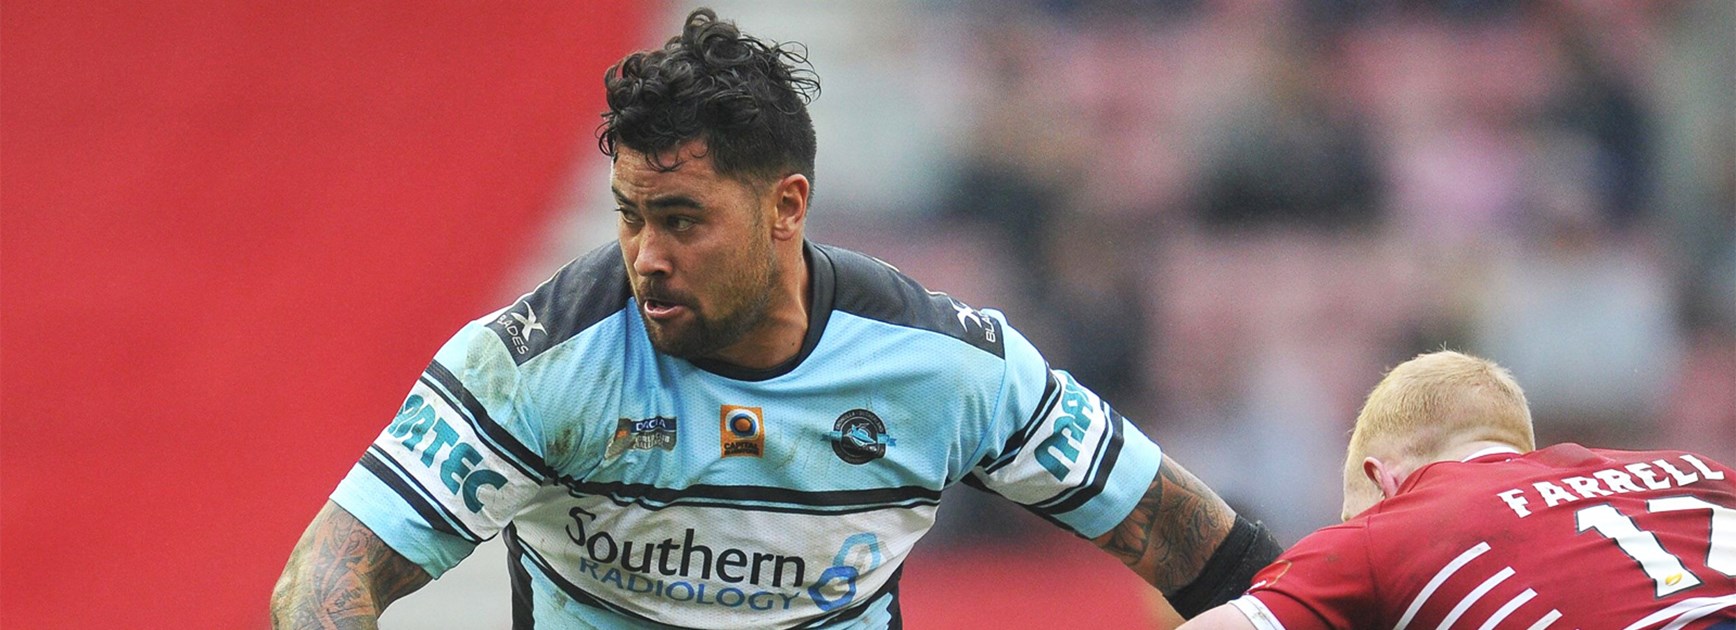 Andrew Fifita makes a charge during the World Club Challenge.